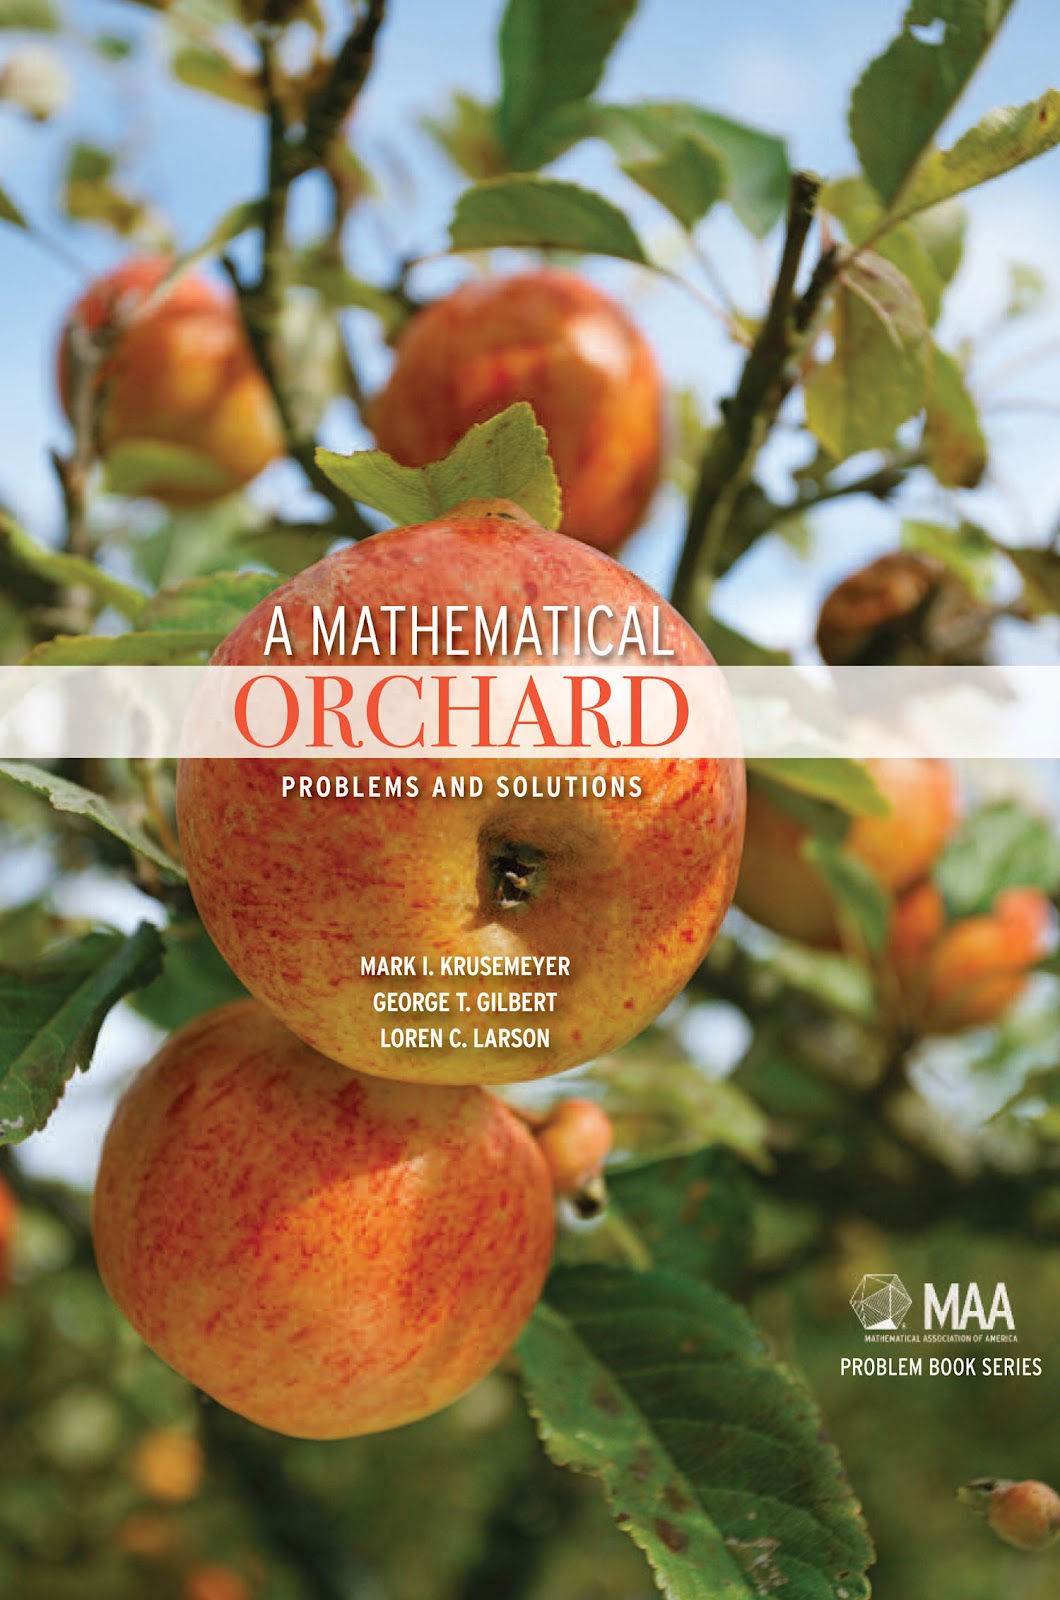 A Mathematical Orchard: Problems and Solutions (MAA Problem Book Series) Mark I. Krusemeyer, George T. Gilbert and Loren C. Larson